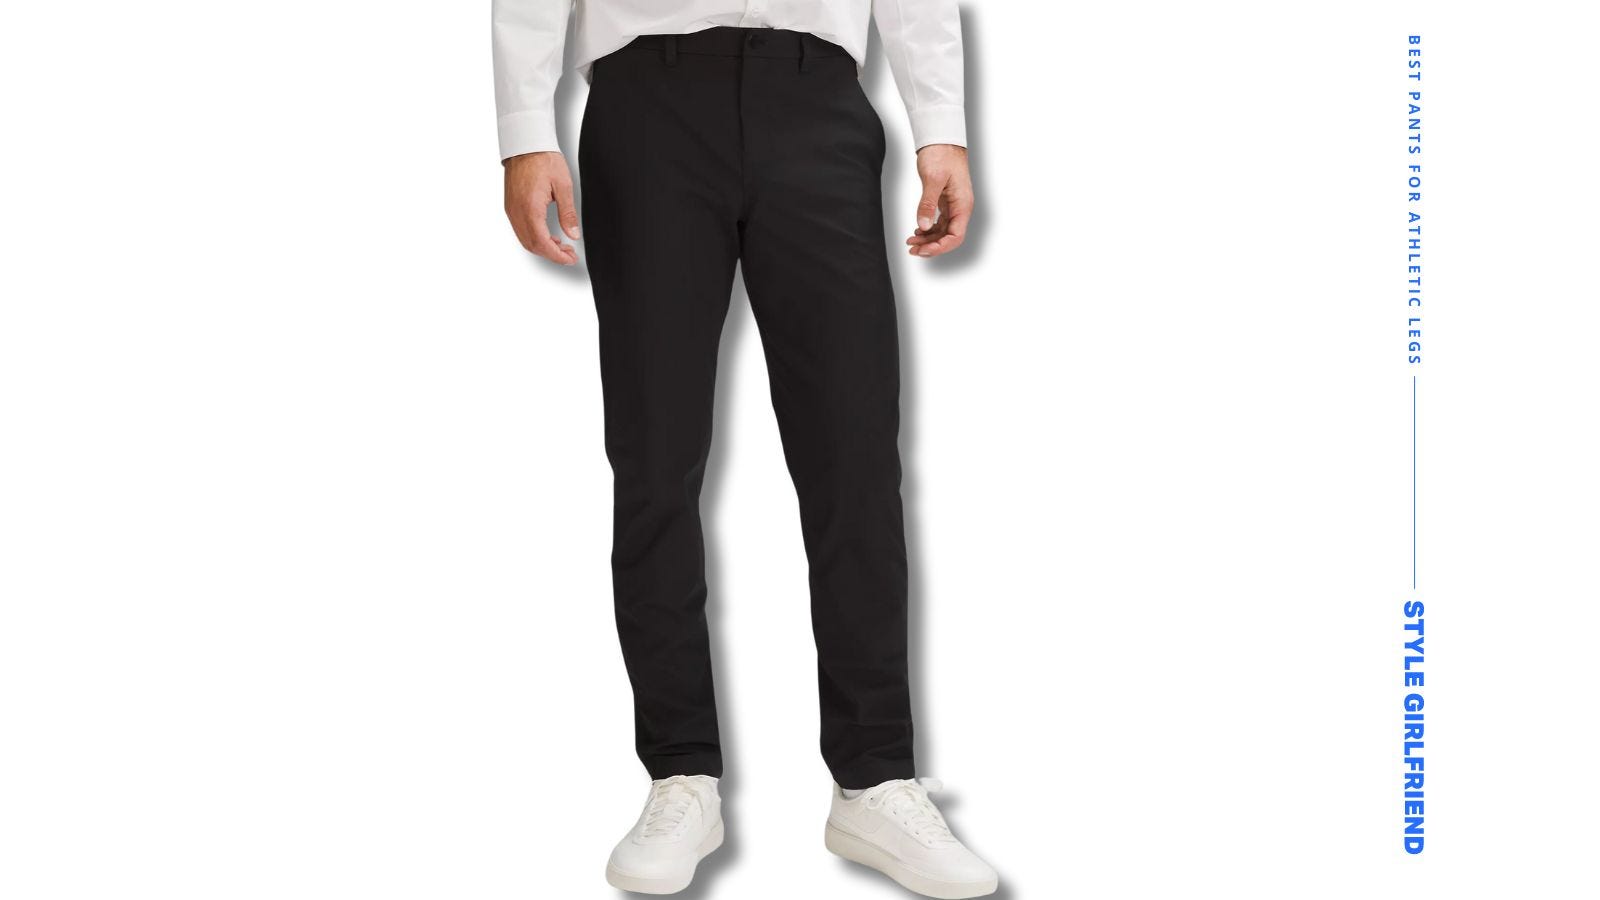 man in a white dress shirt and dark dress pants with white sneakers against a white background. text on-screen reads: best pants for athletic legs